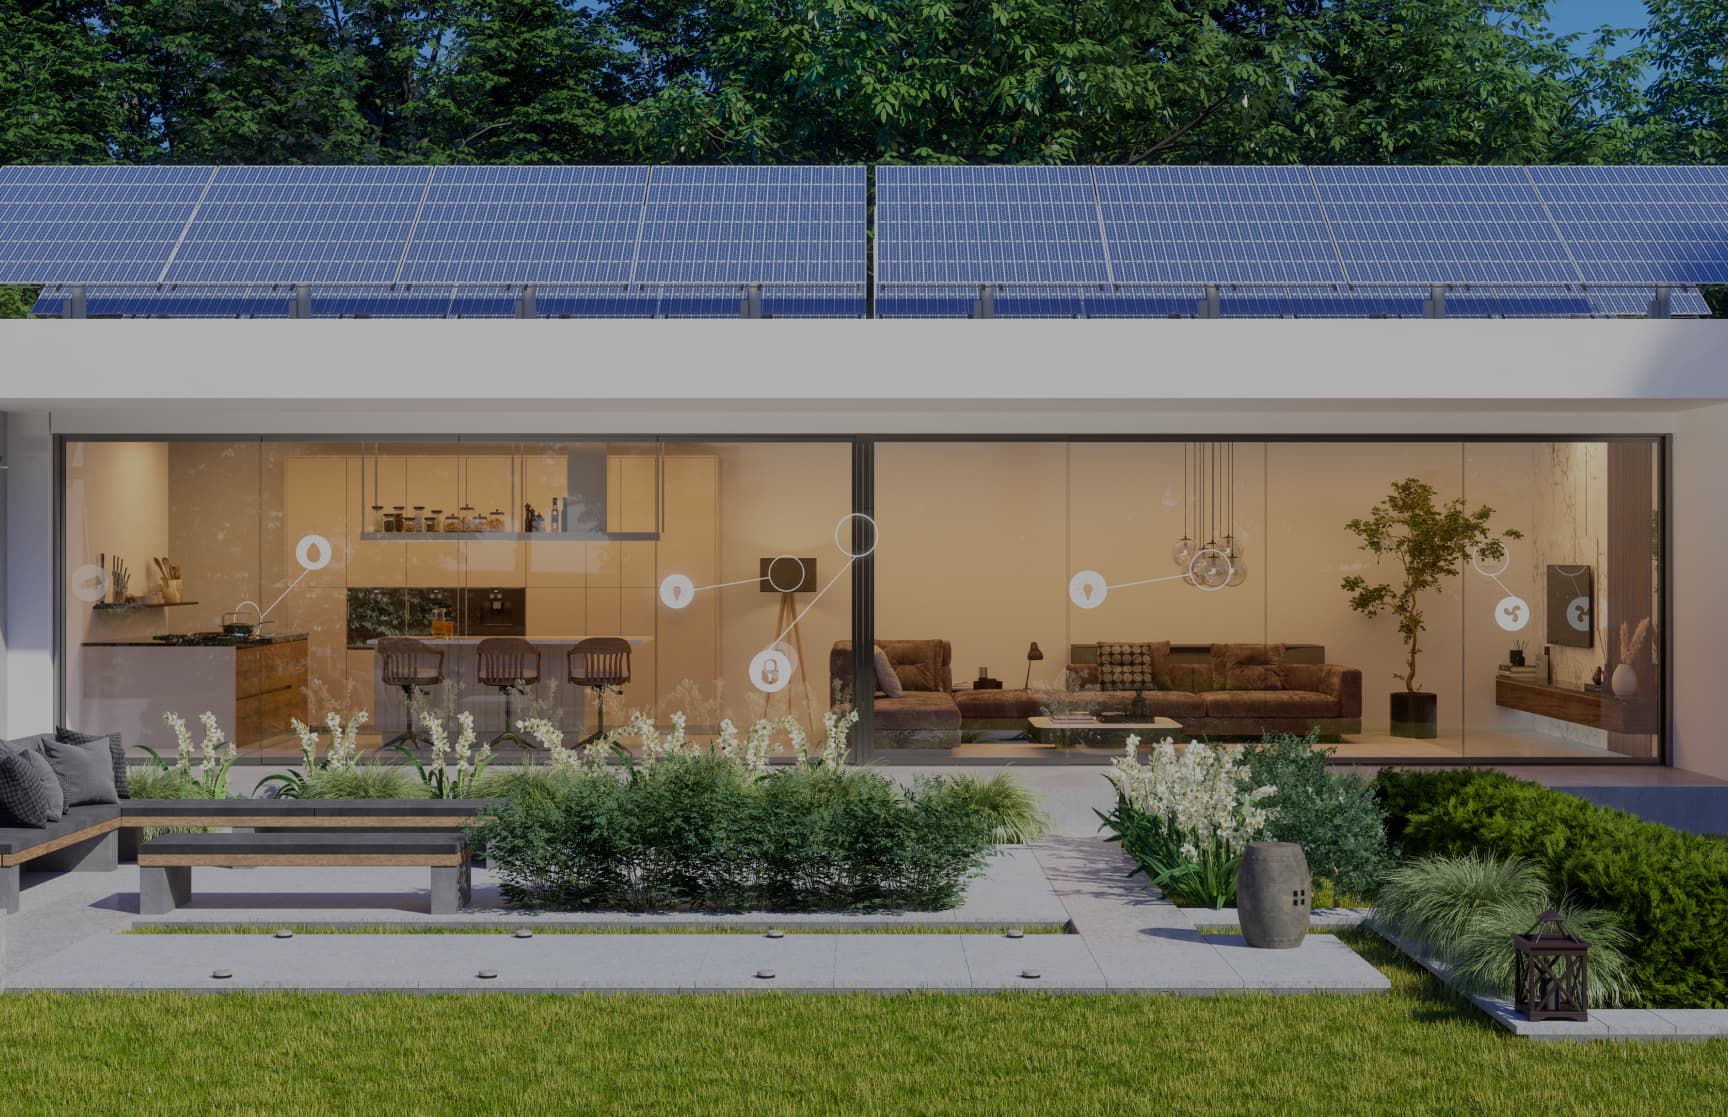 Building a Sustainable Lifestyle: The Zero-Carbon Homes Revolution